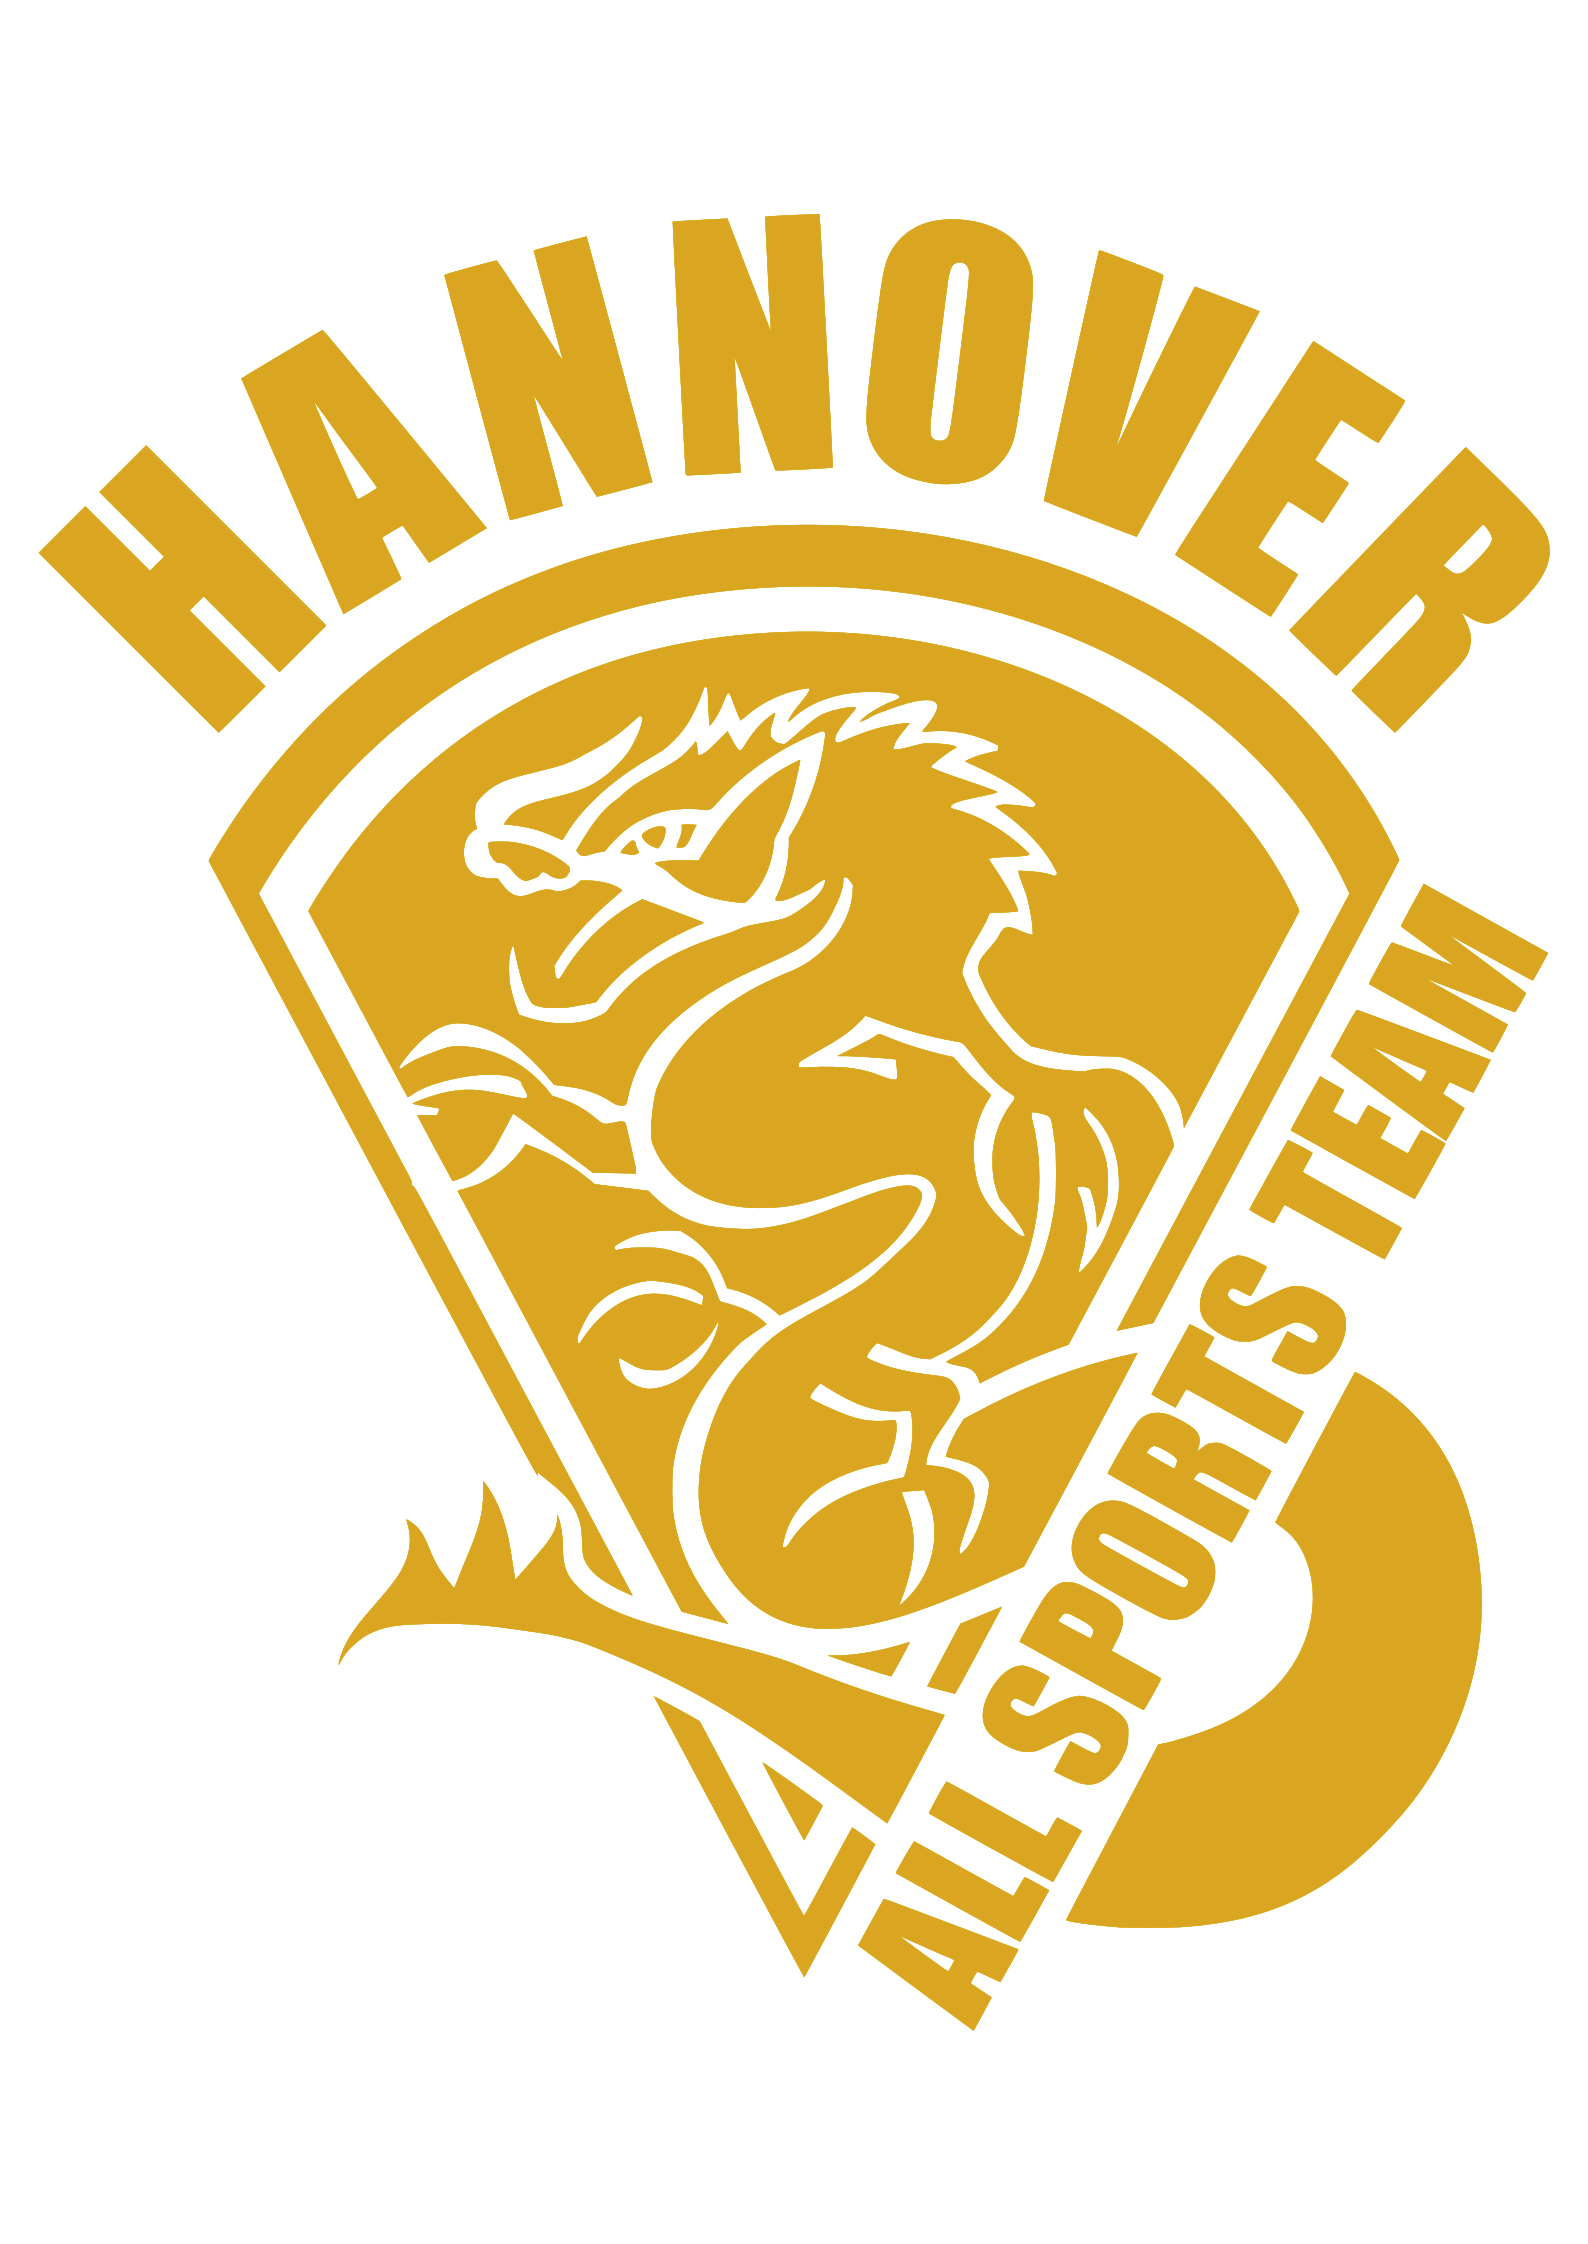 All Sports Team Hannover